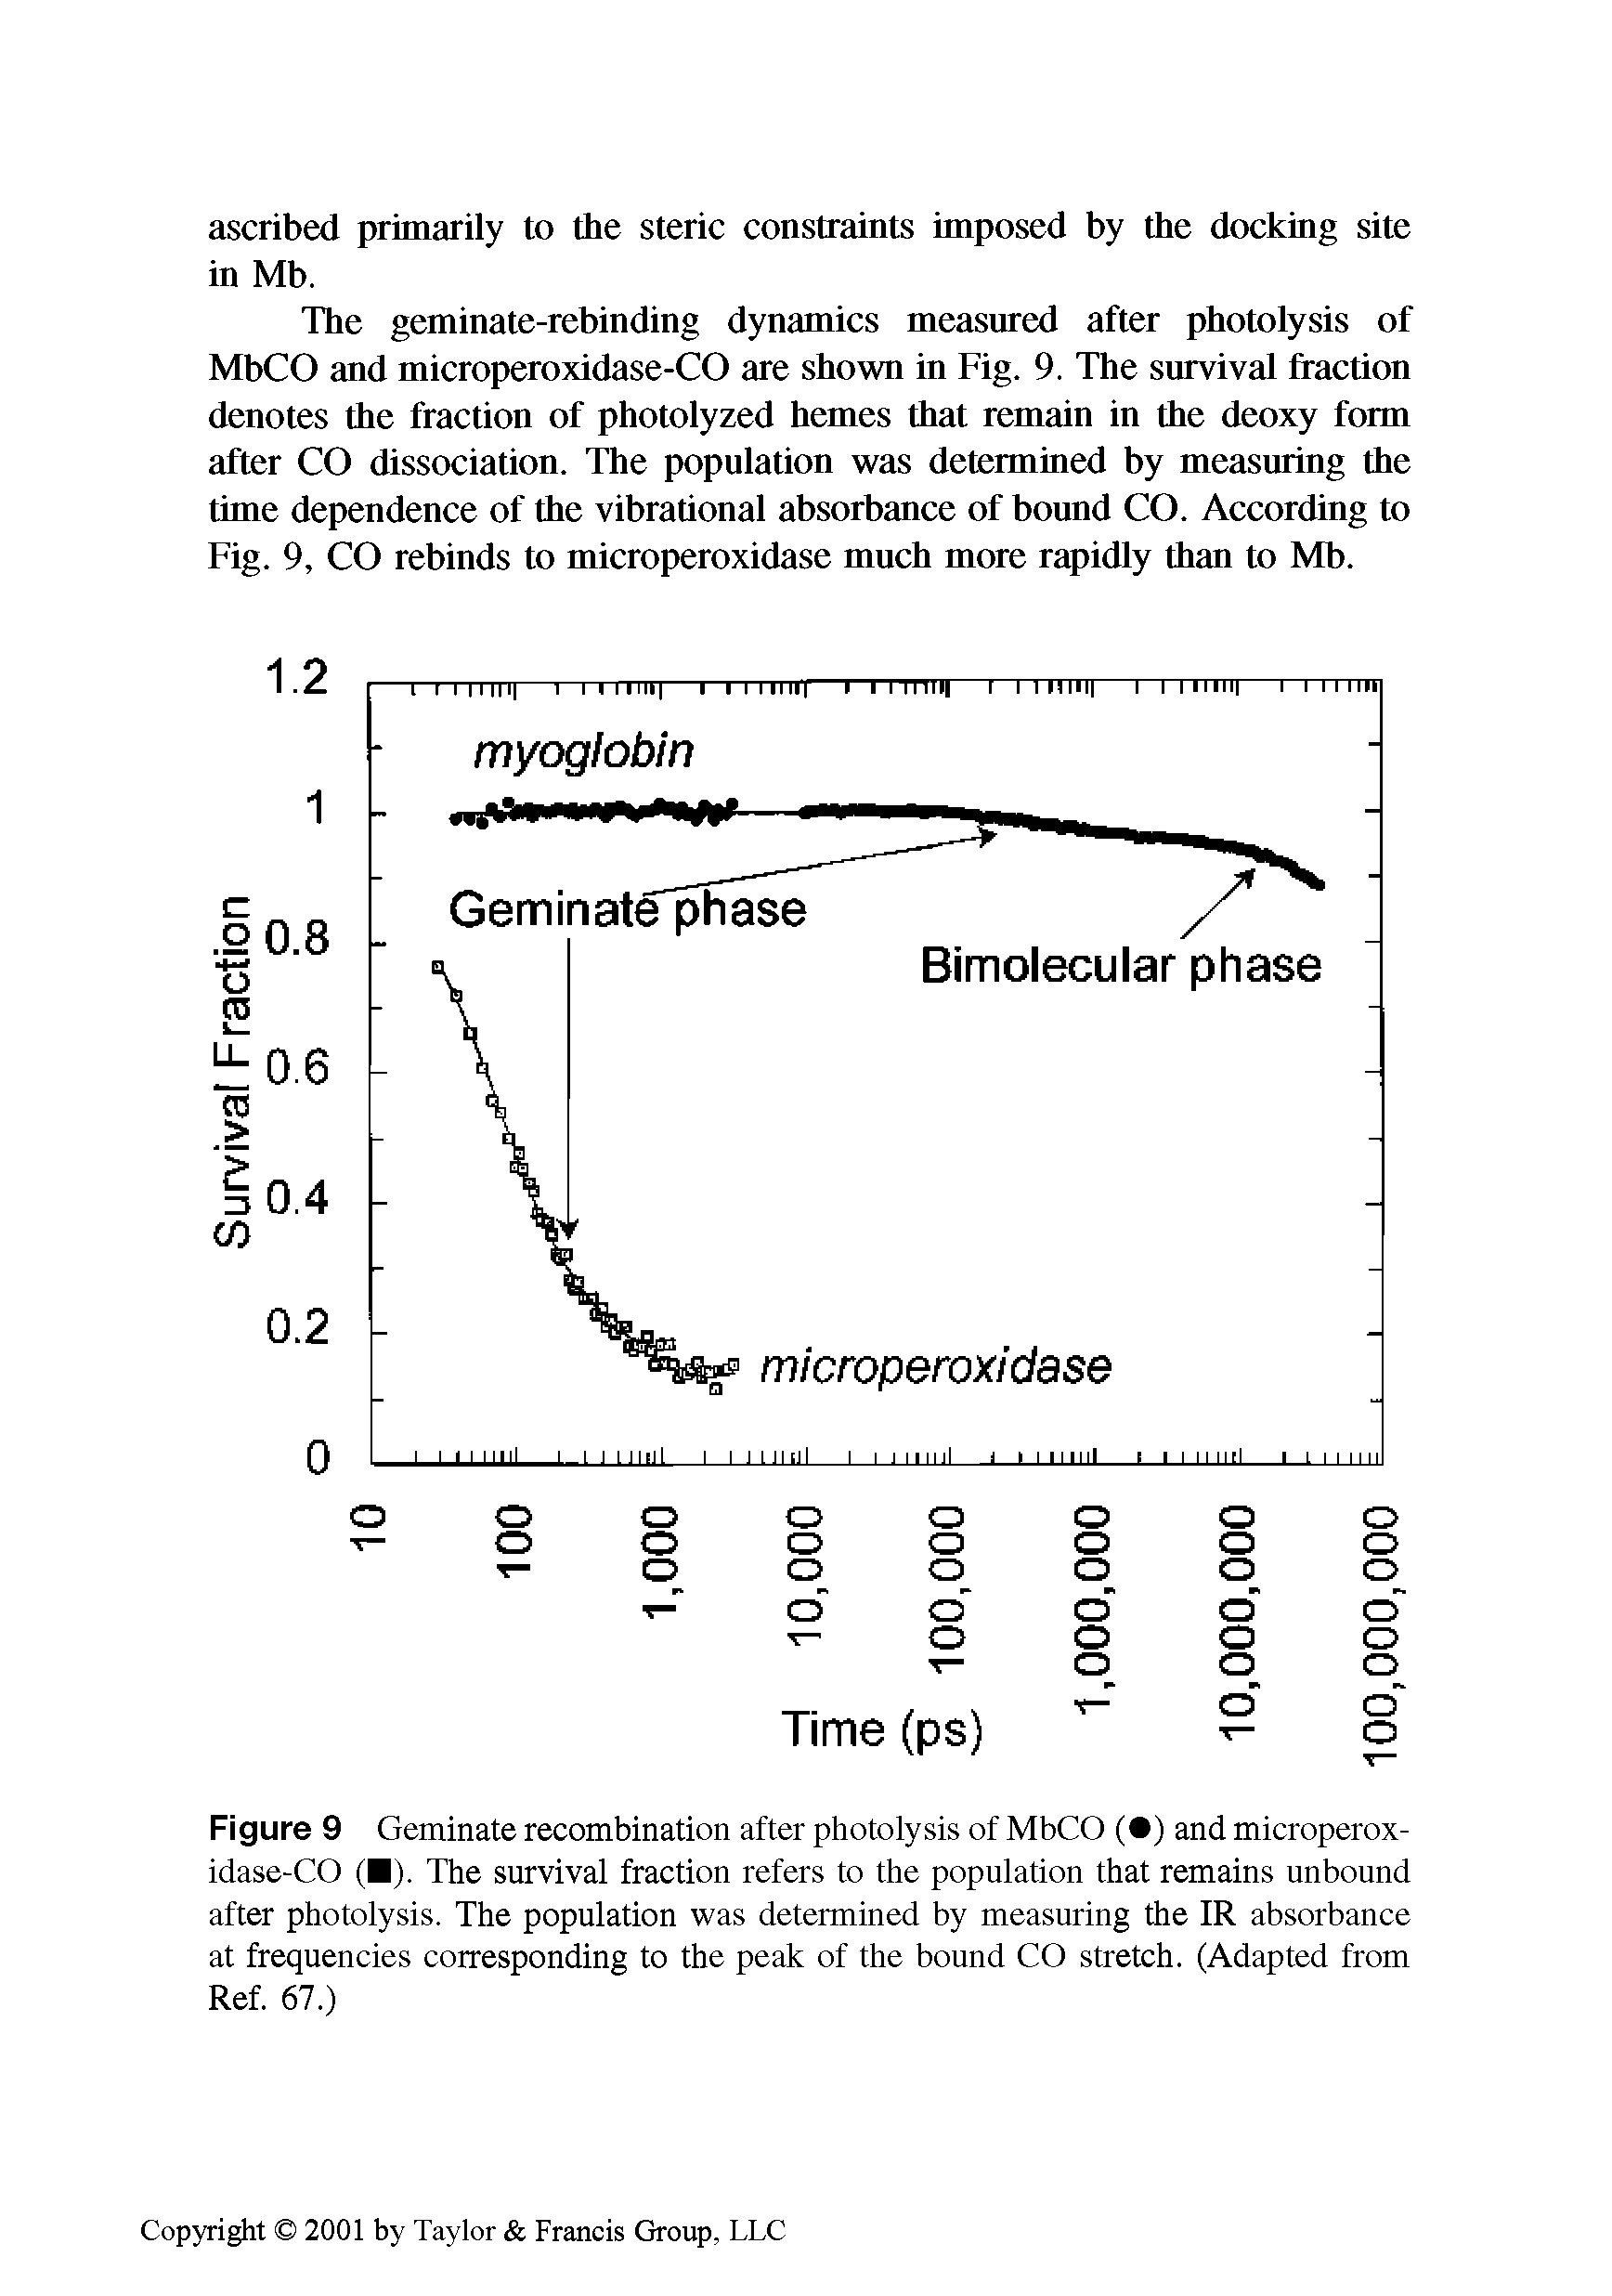 Figure 9 Geminate recombination after photolysis of MbCO ( ) and microperoxidase-CO ( ). The survival fraction refers to the population that remains unbound after photolysis. The population was determined by measuring the IR absorbance at frequencies corresponding to the peak of the bound CO stretch. (Adapted from Ref. 67.)...